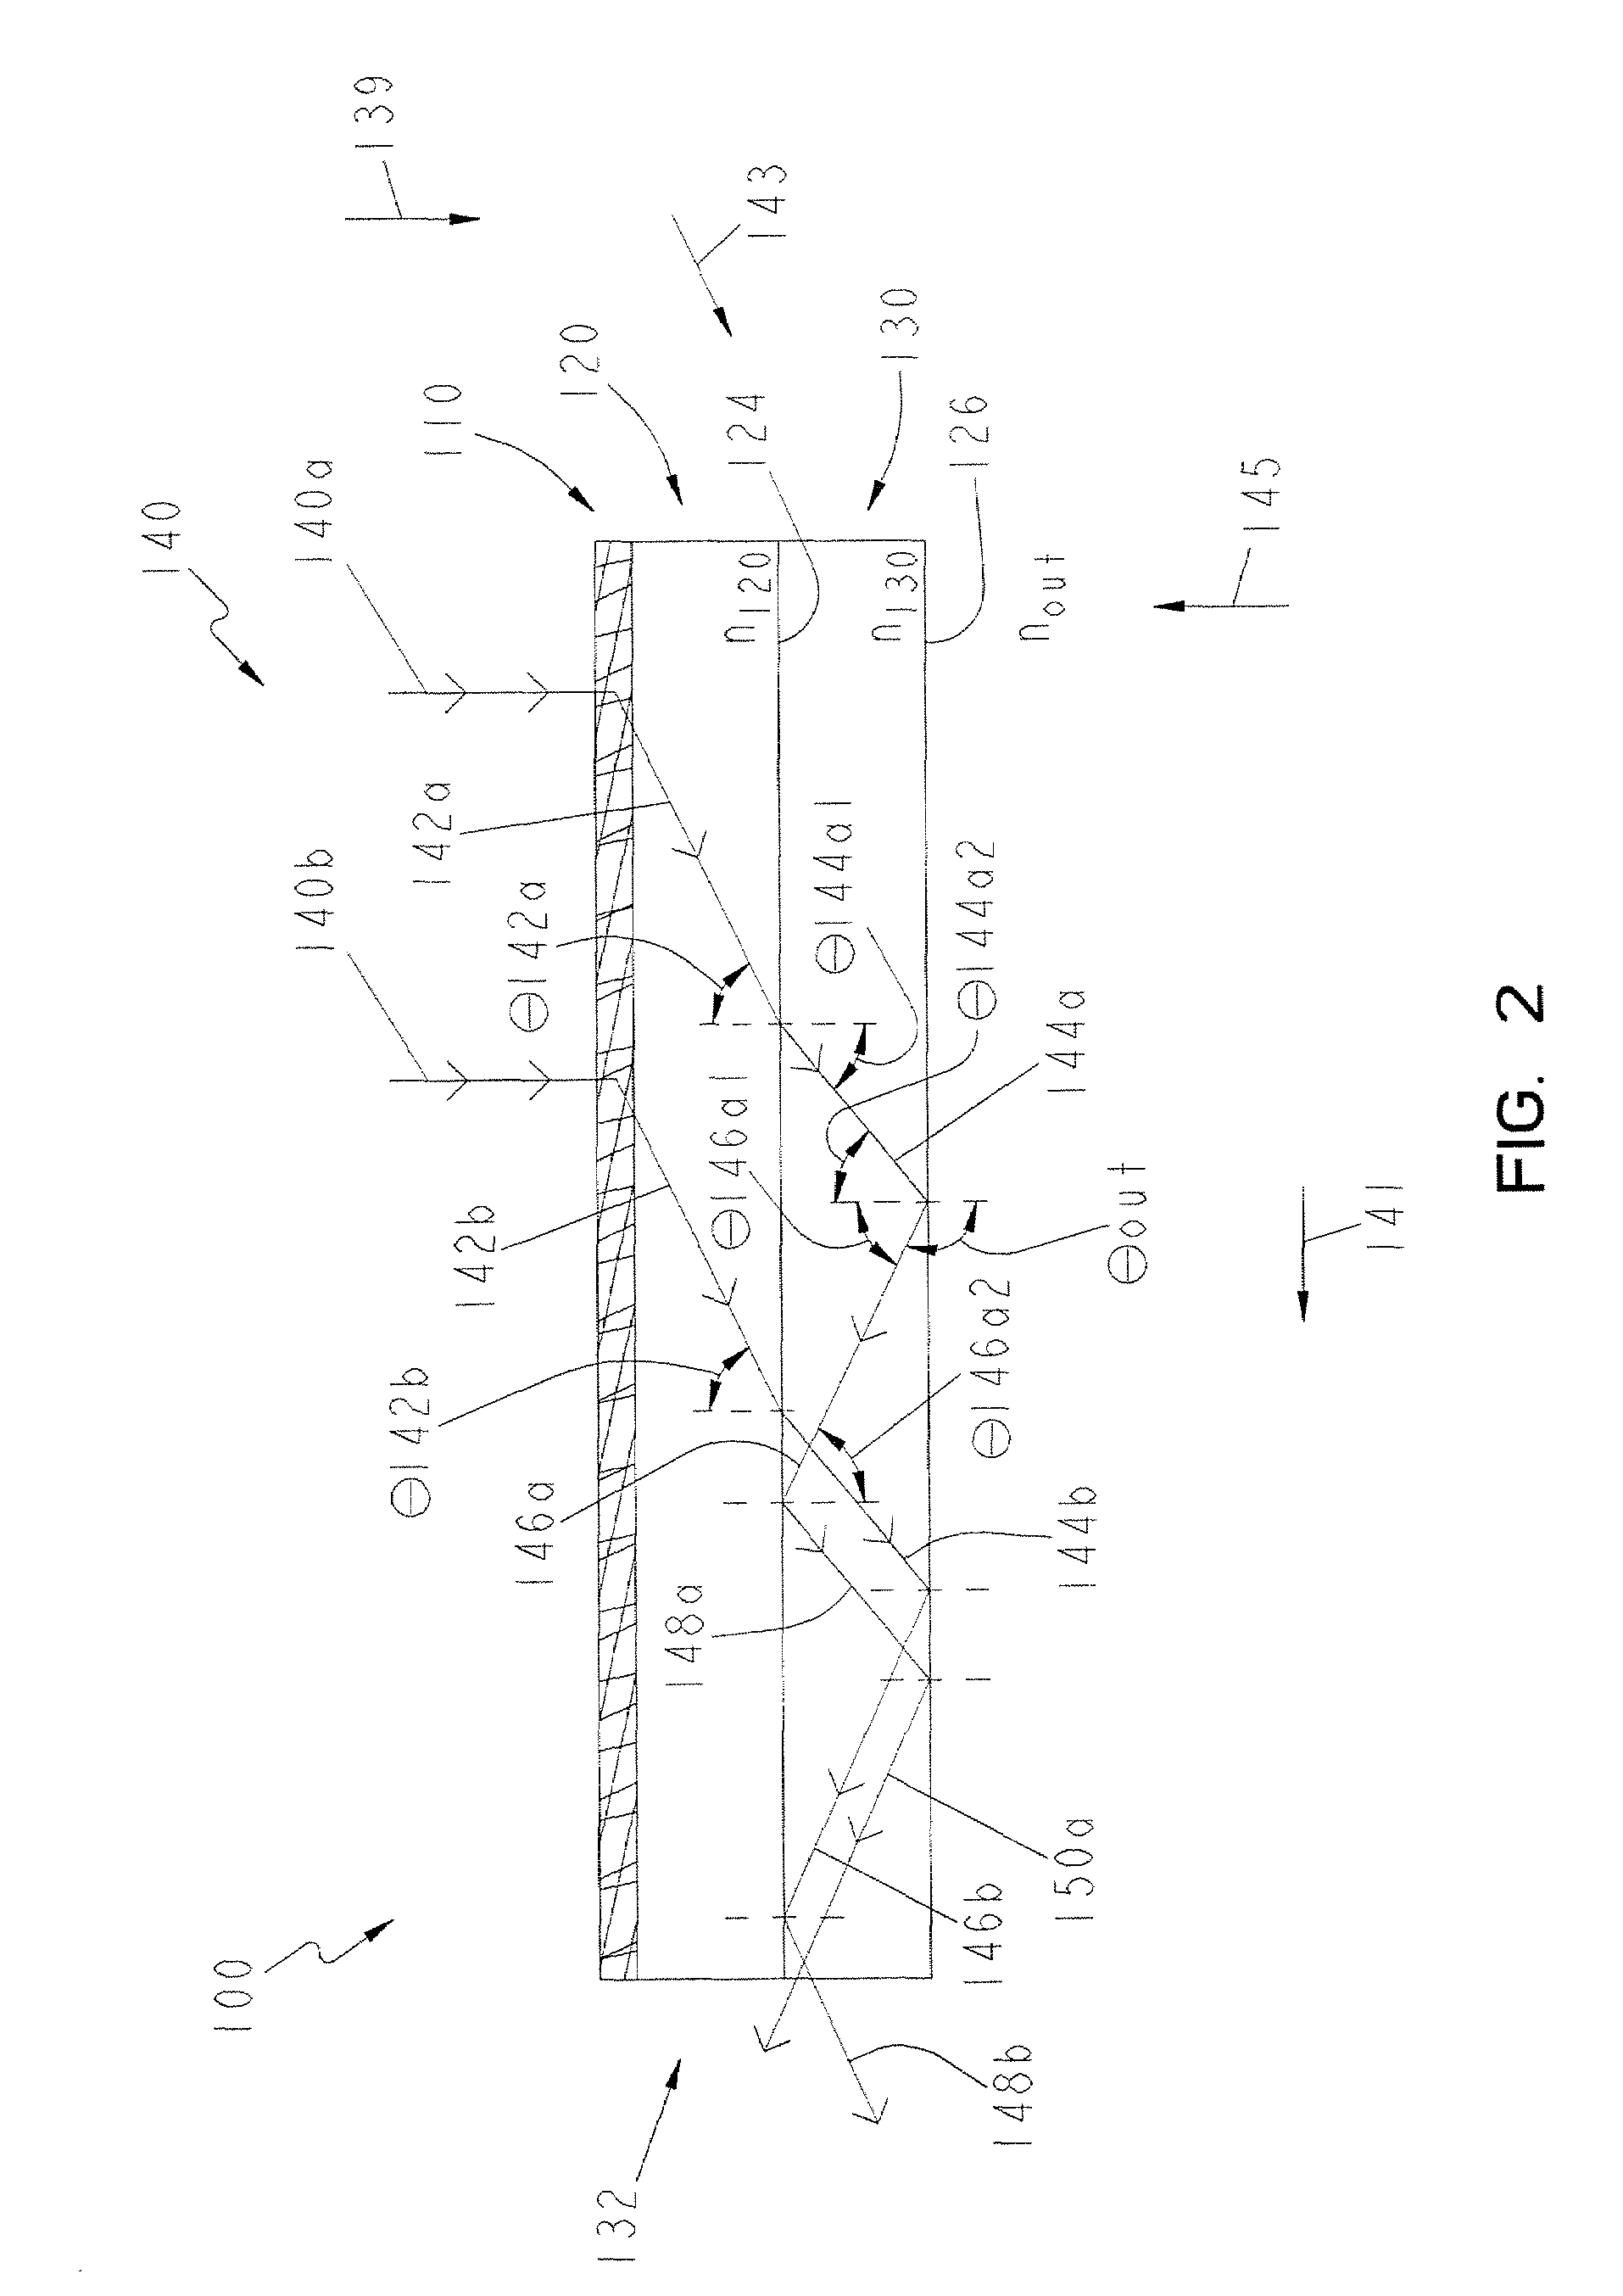 Apparatus for the collection and transmission of electromagnetic radiation